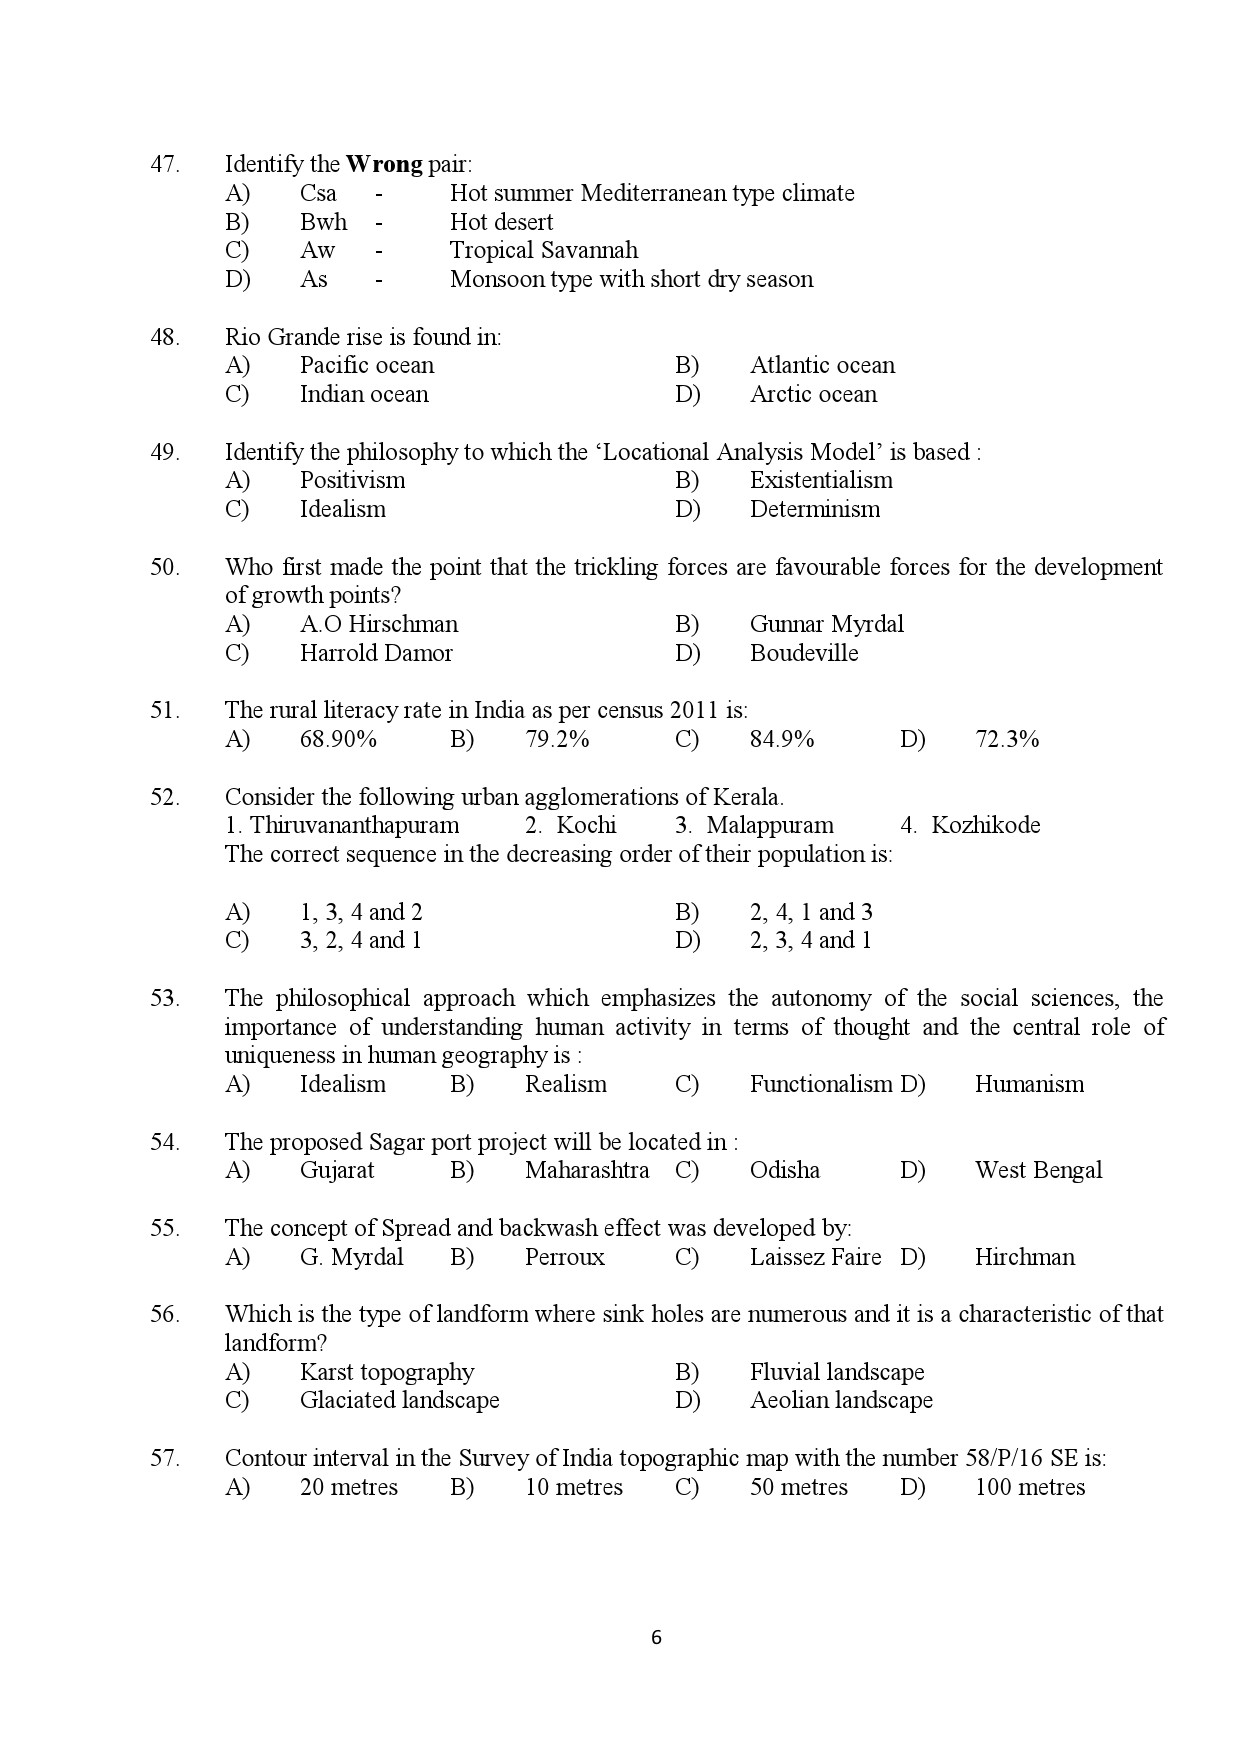 Kerala SET Geography Exam Question Paper February 2018 6